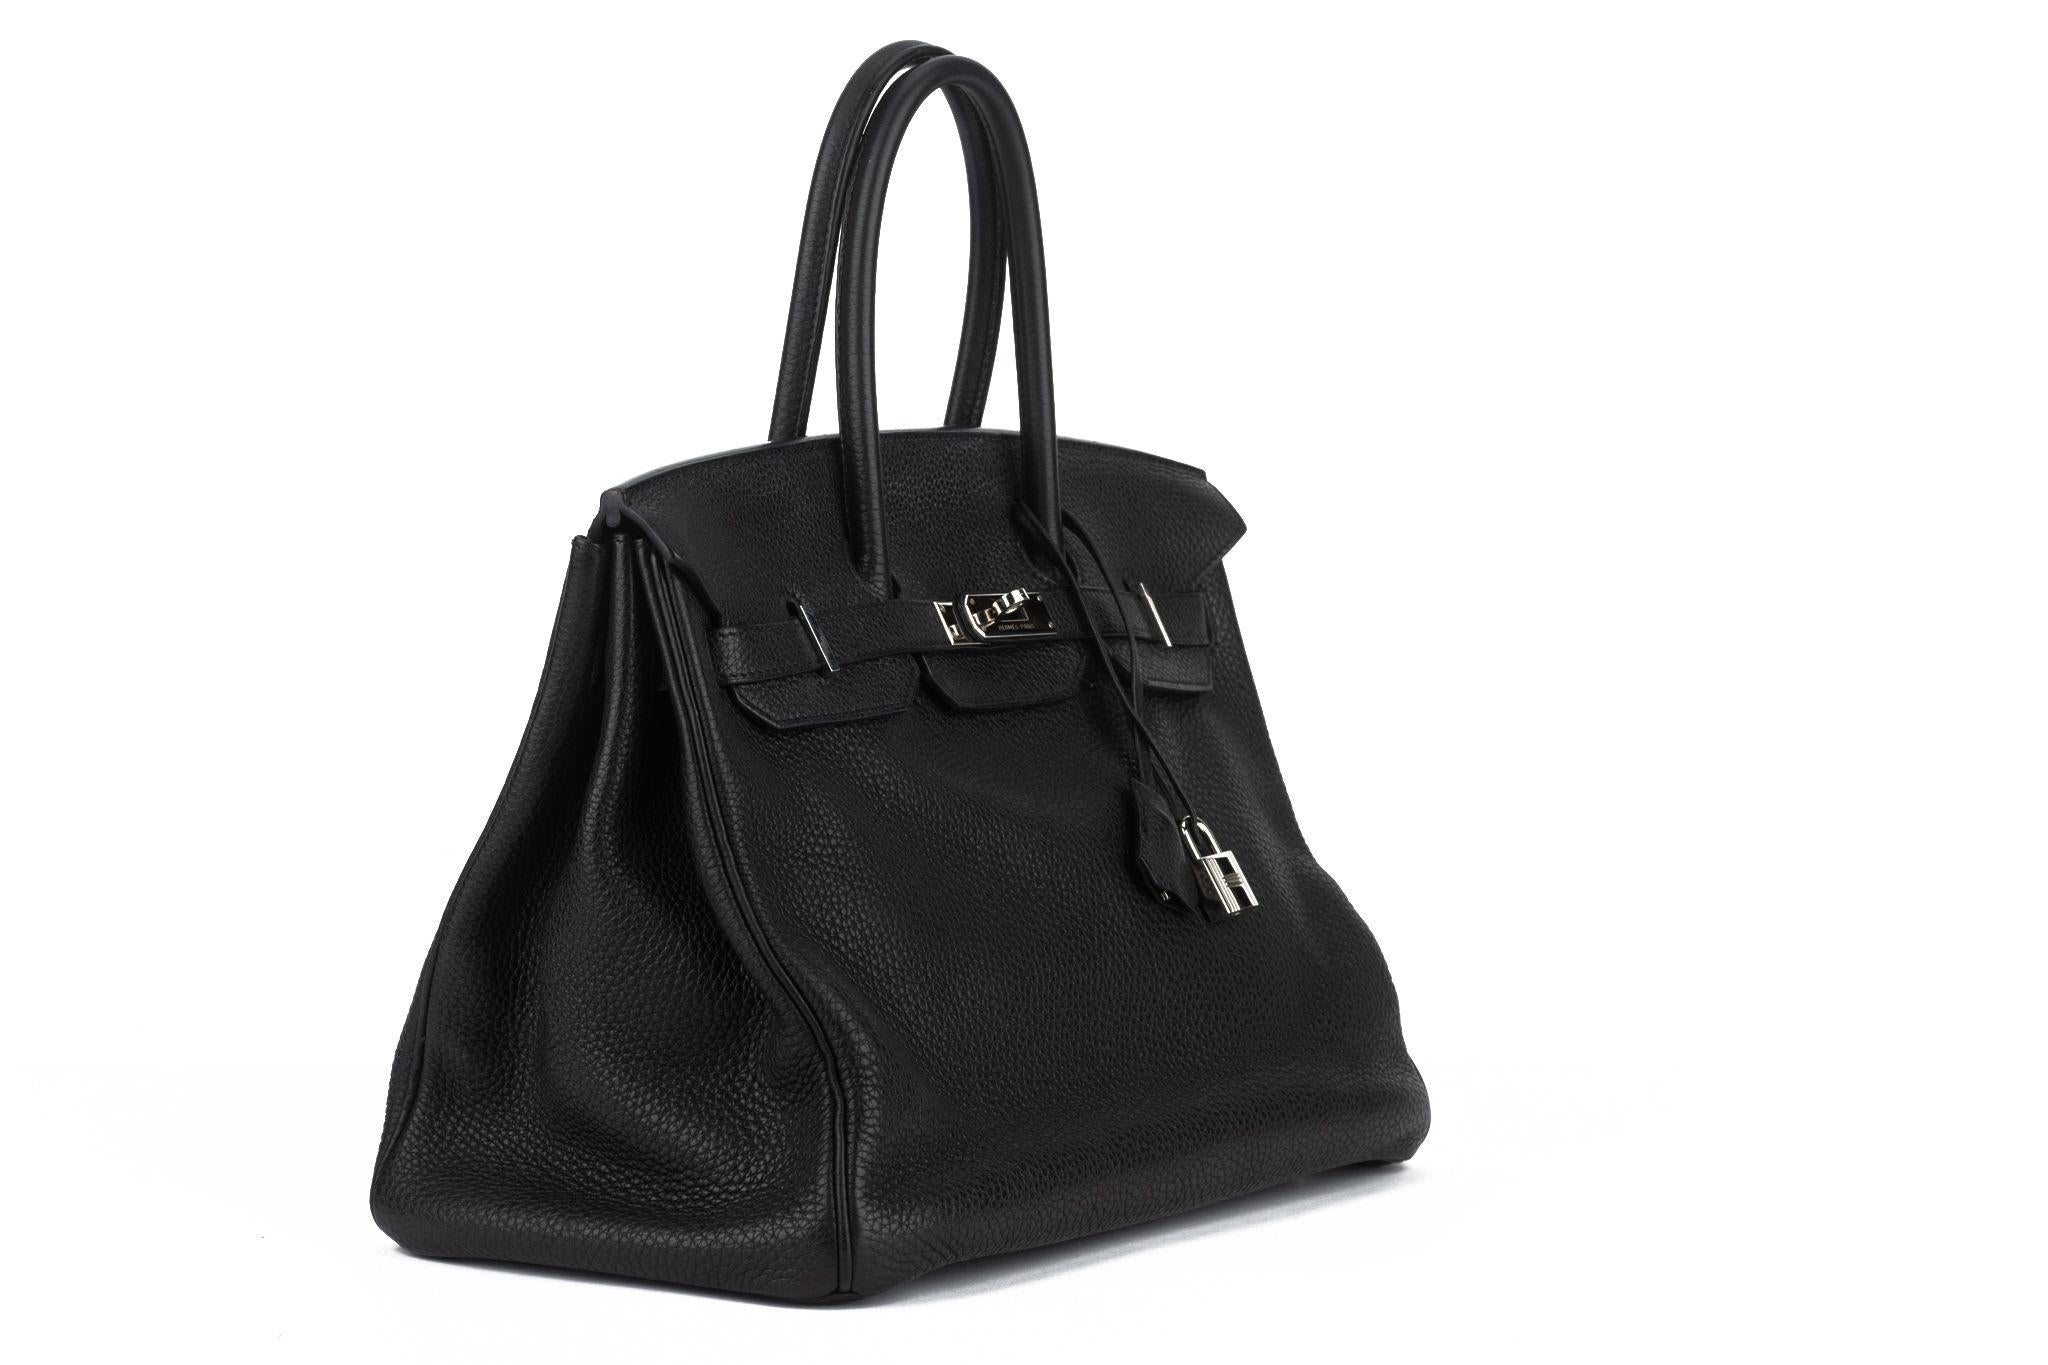 Hermès Birkin 35 black taurillon clemence leather with palladium hardware with tonal stitching. Signature slouchy look fro taurillon clemence, can made look more constructed with bag insert. Front flap, two straps with center toggle closure,